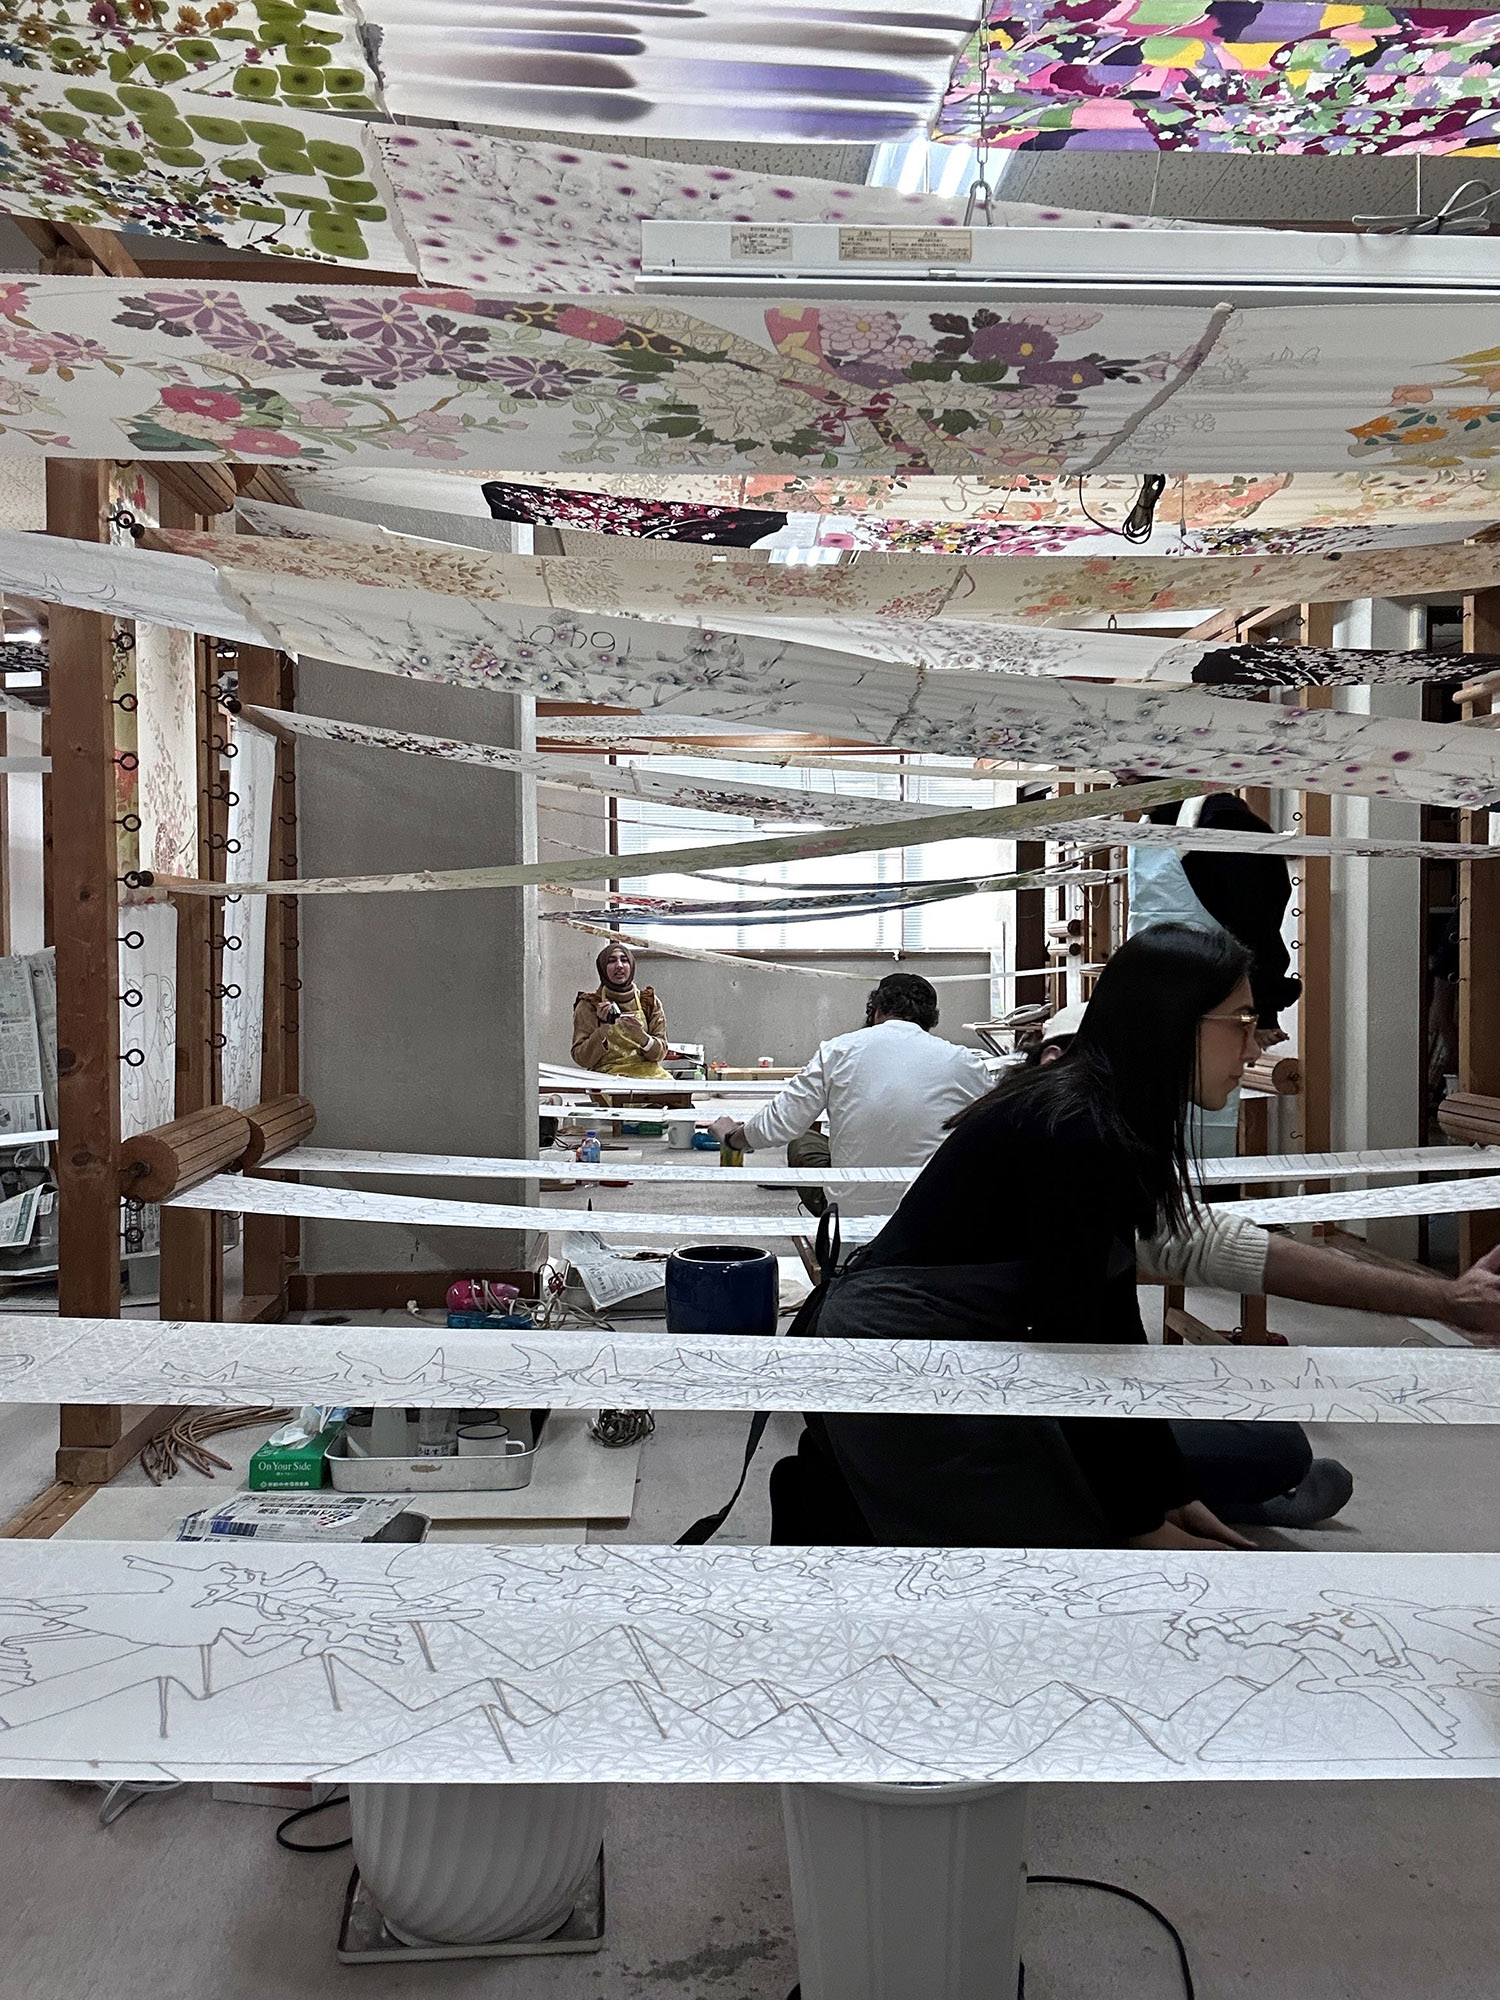 Students working between sheets of painted silk hanging above them